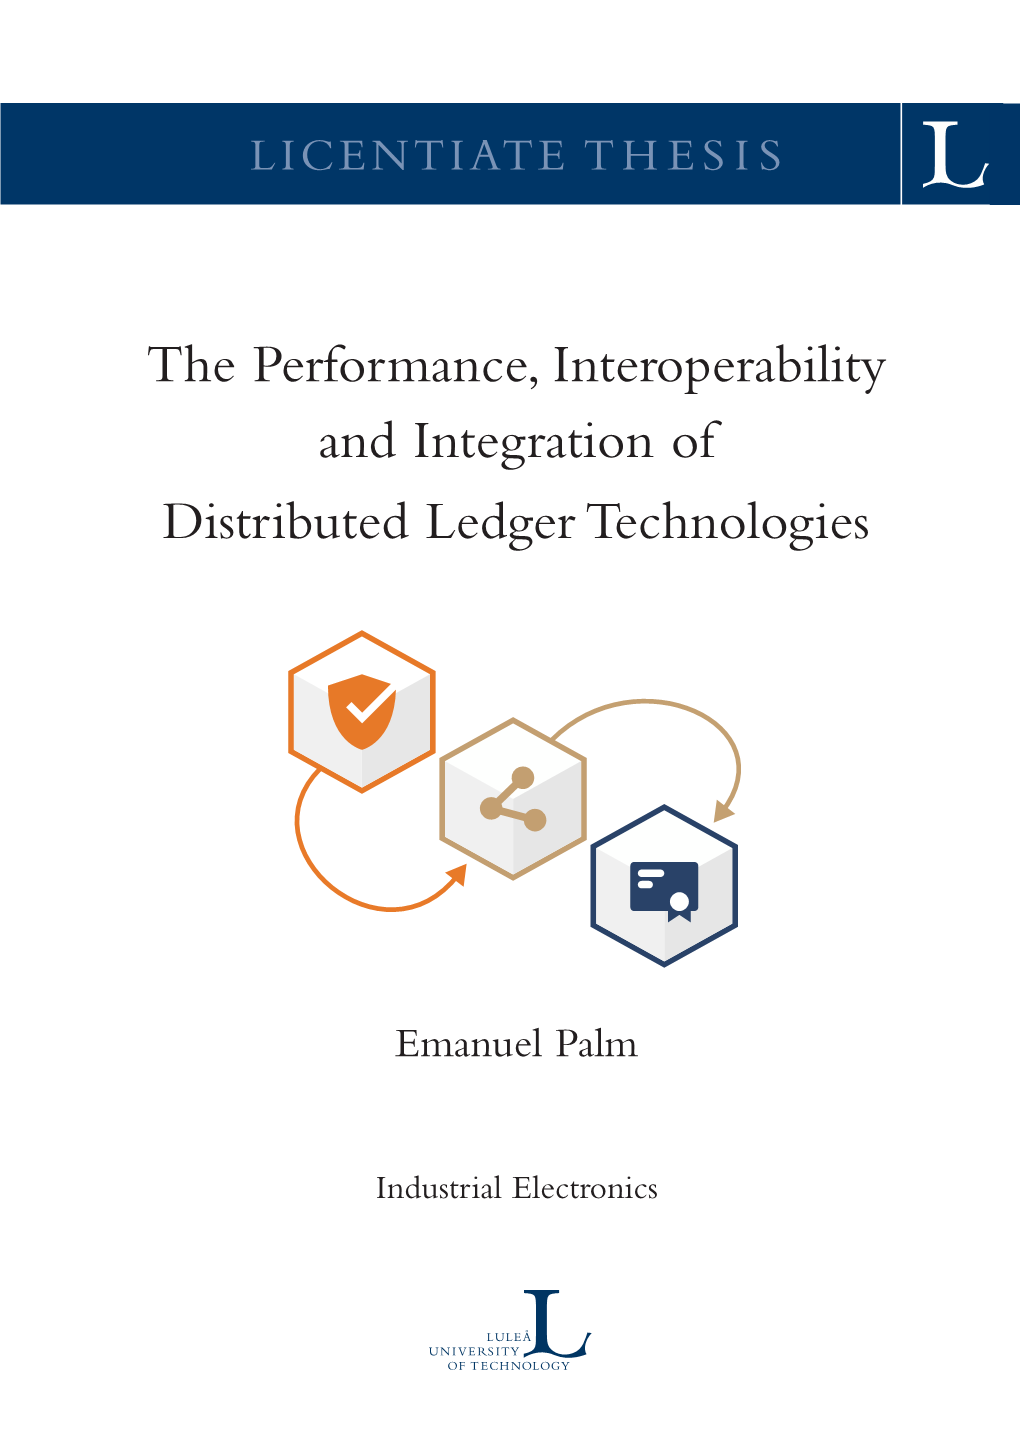 The Performance, Interoperability and Integration of Distributed Ledger Technologies